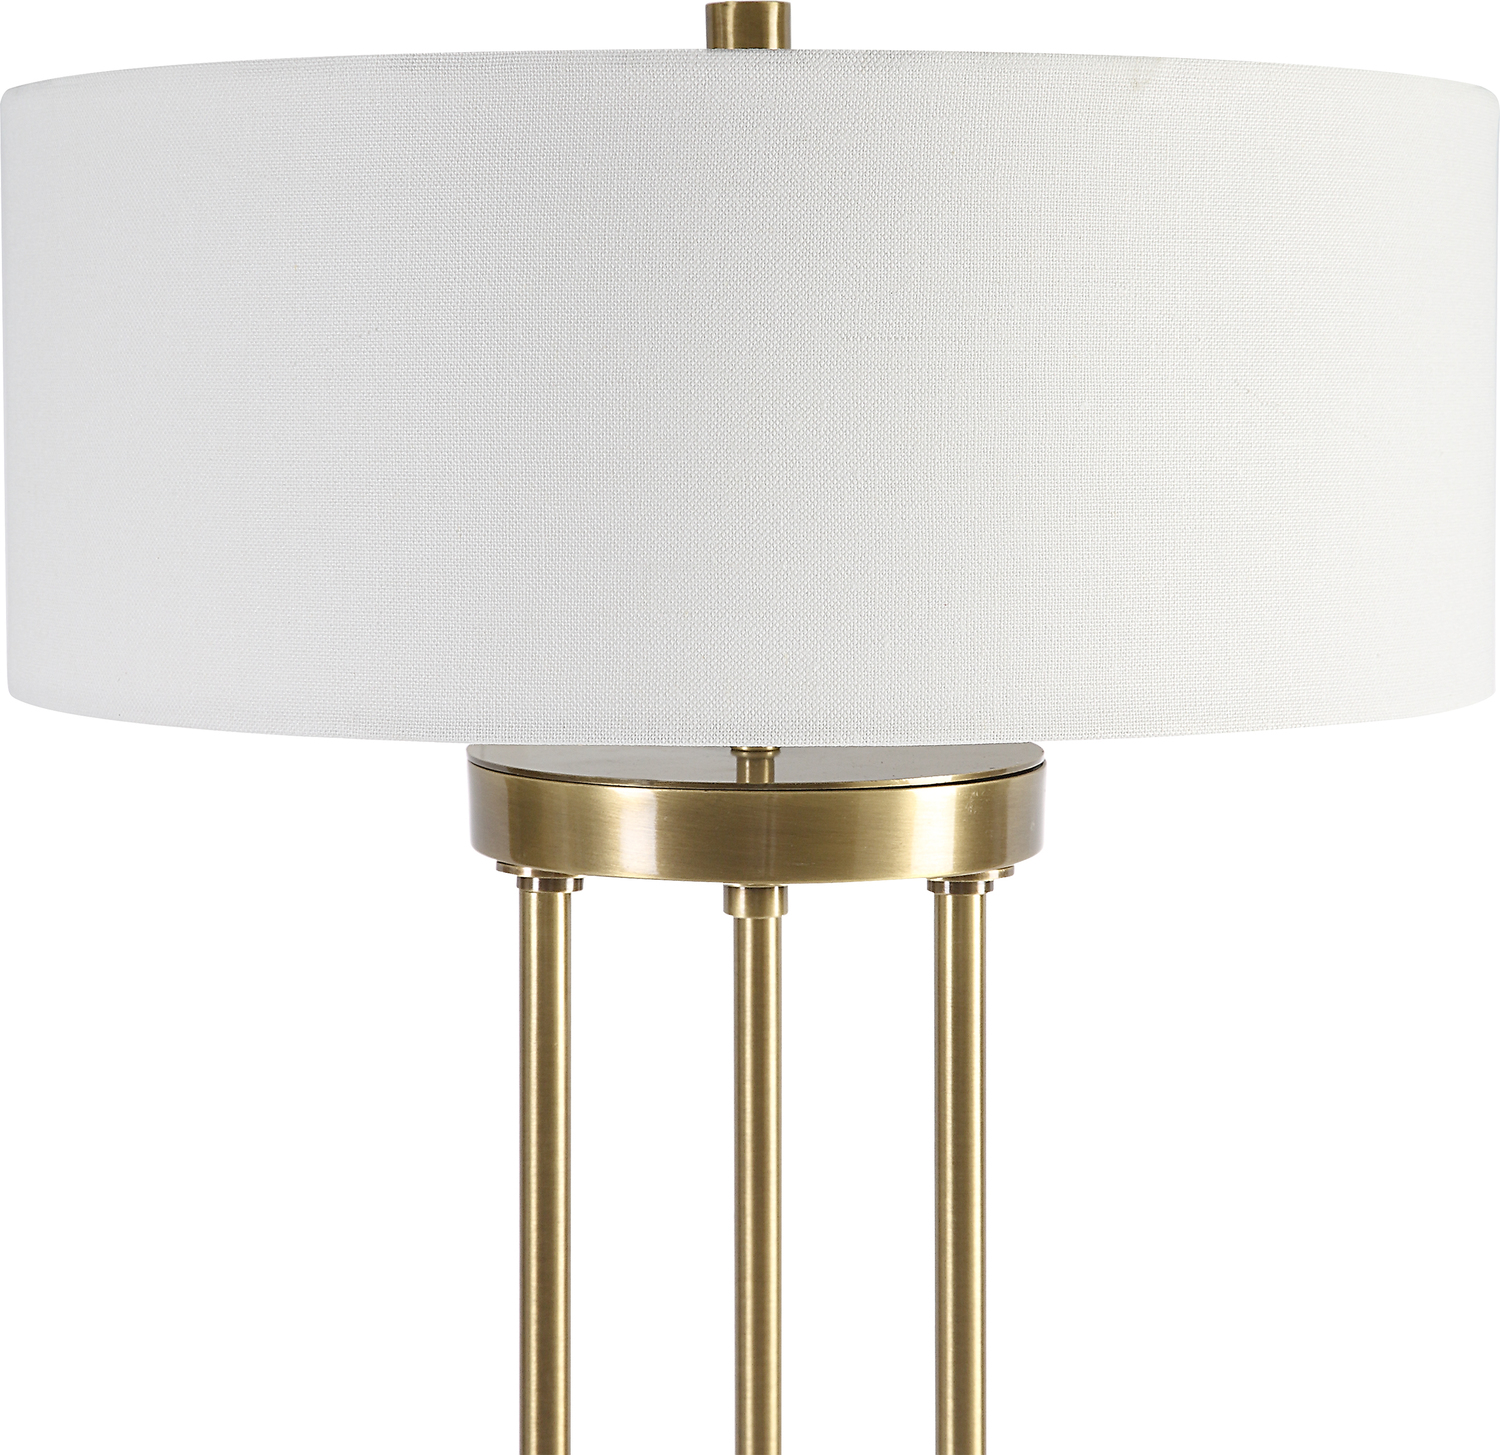 white globe bulb Uttermost Brass Rod Table Lamp Sophisticated And Timeless, This Table Lamp Showcases An Updated Traditional Feel With Solid Iron Rods Finished In Plated Antique Brass And An Elegant Crystal Foot. An Off-white Drum Shade Completes This Look.